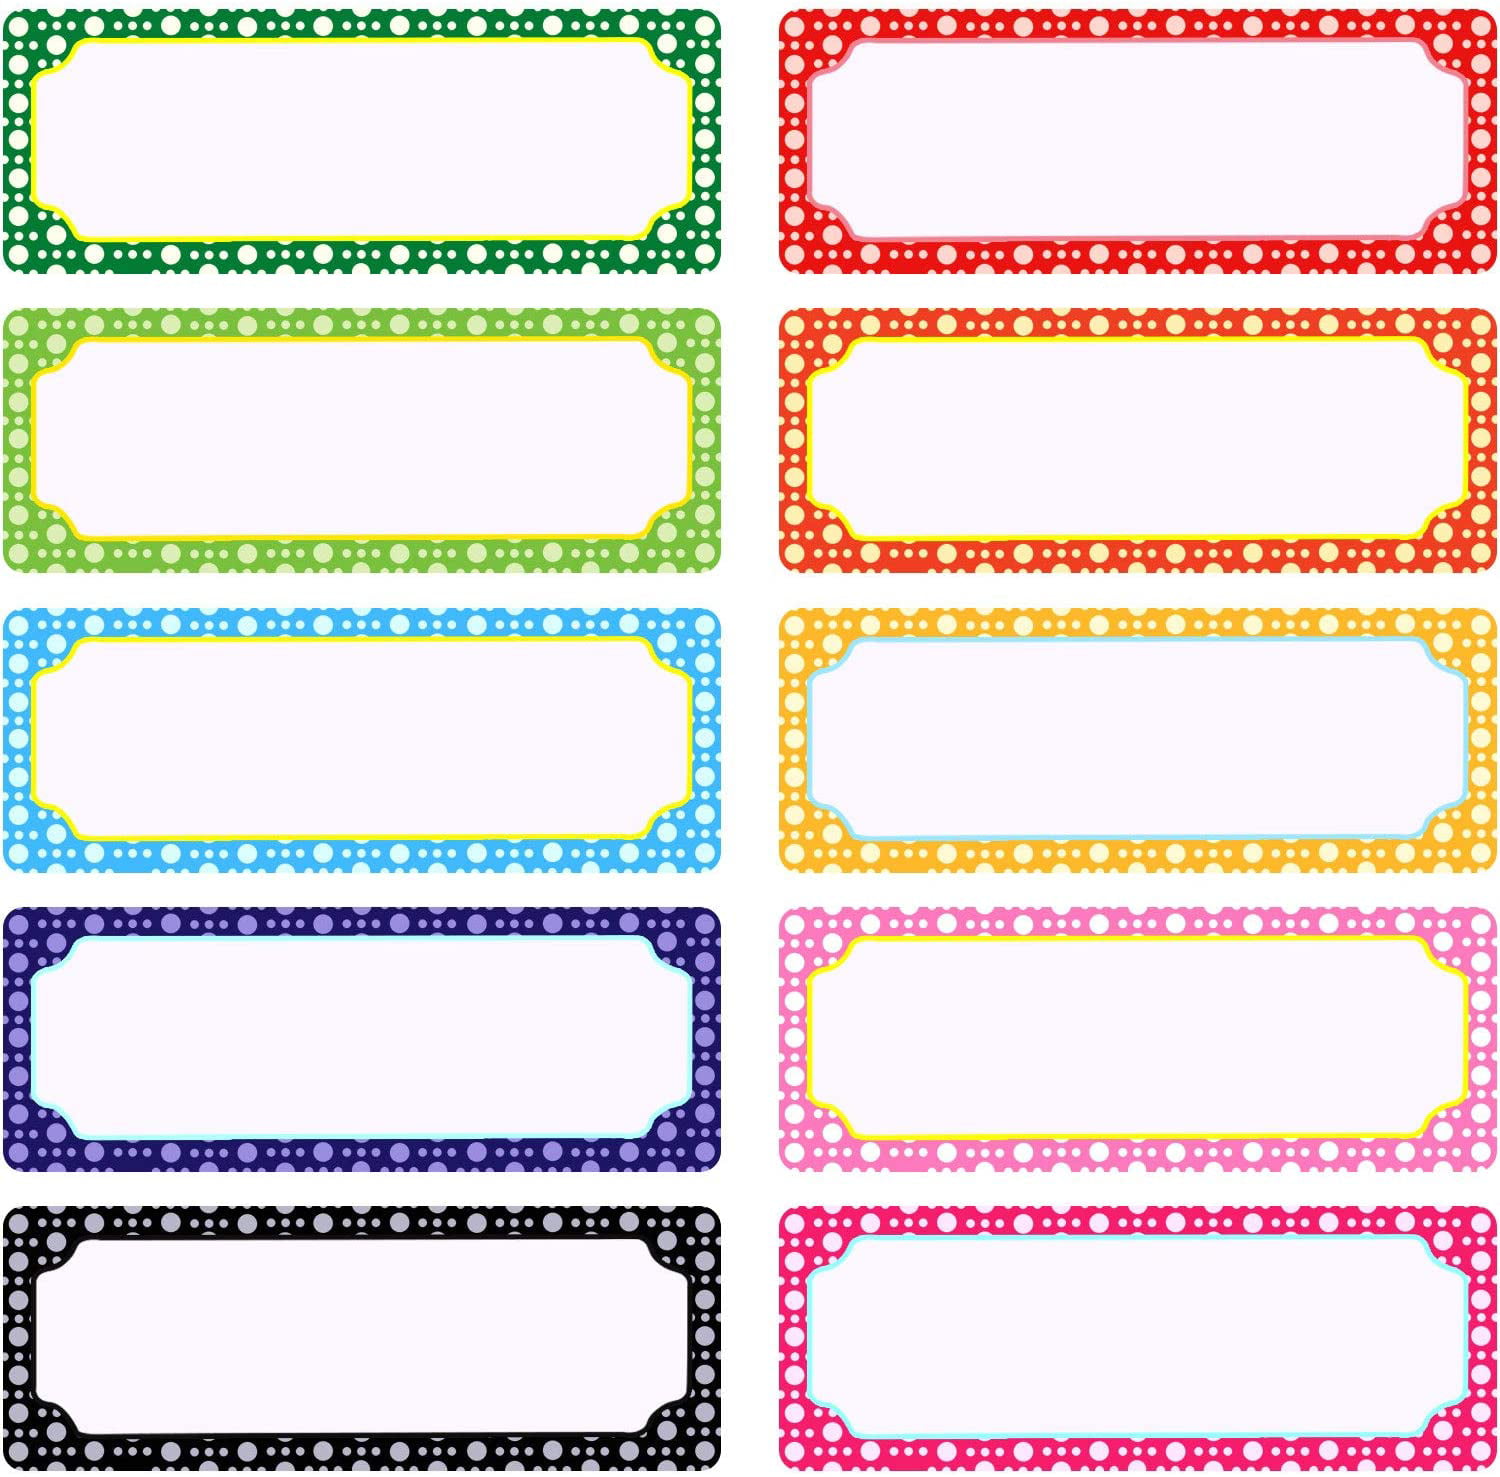 40 Pieces Magnetic Dry Erase Labels 3 x 1.2 Inch Name Plate Labels Writable Flex 